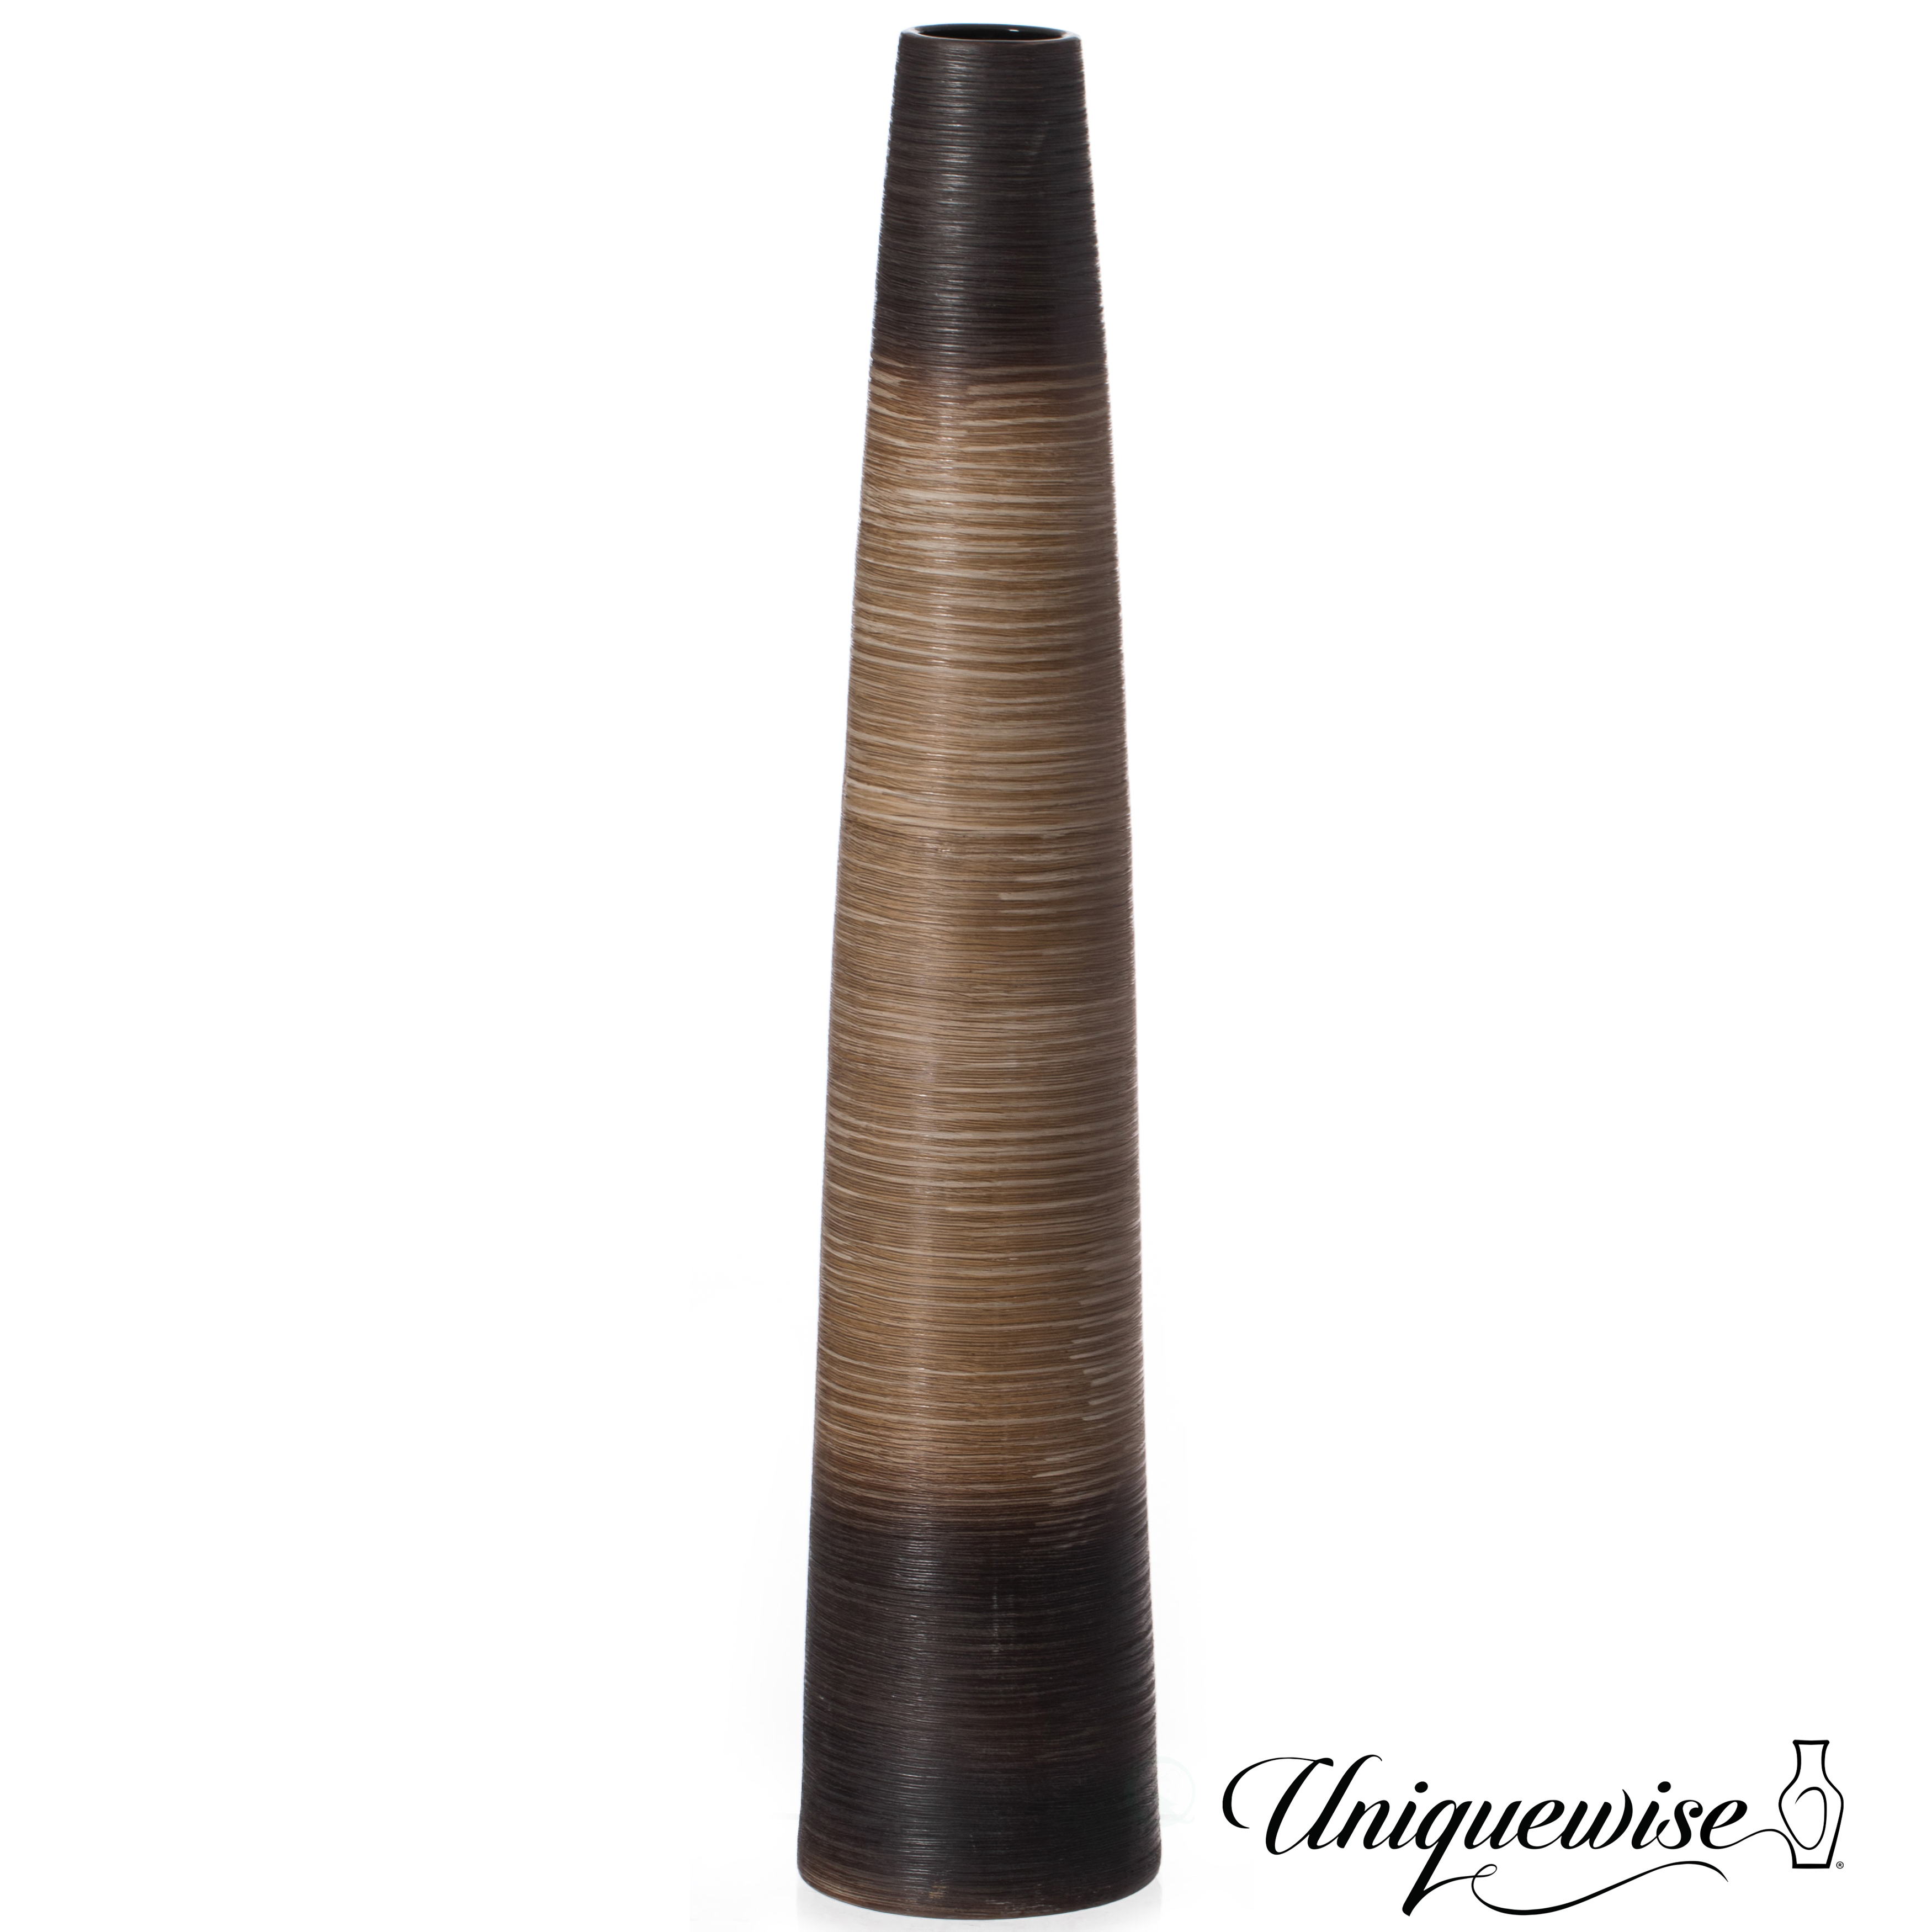 Tall Handcrafted Brown Ceramic Floor Vase - Waterproof Cylinder-Shaped Freestanding Design, Ideal For Tall Floral Arrangements - 39 In Tall